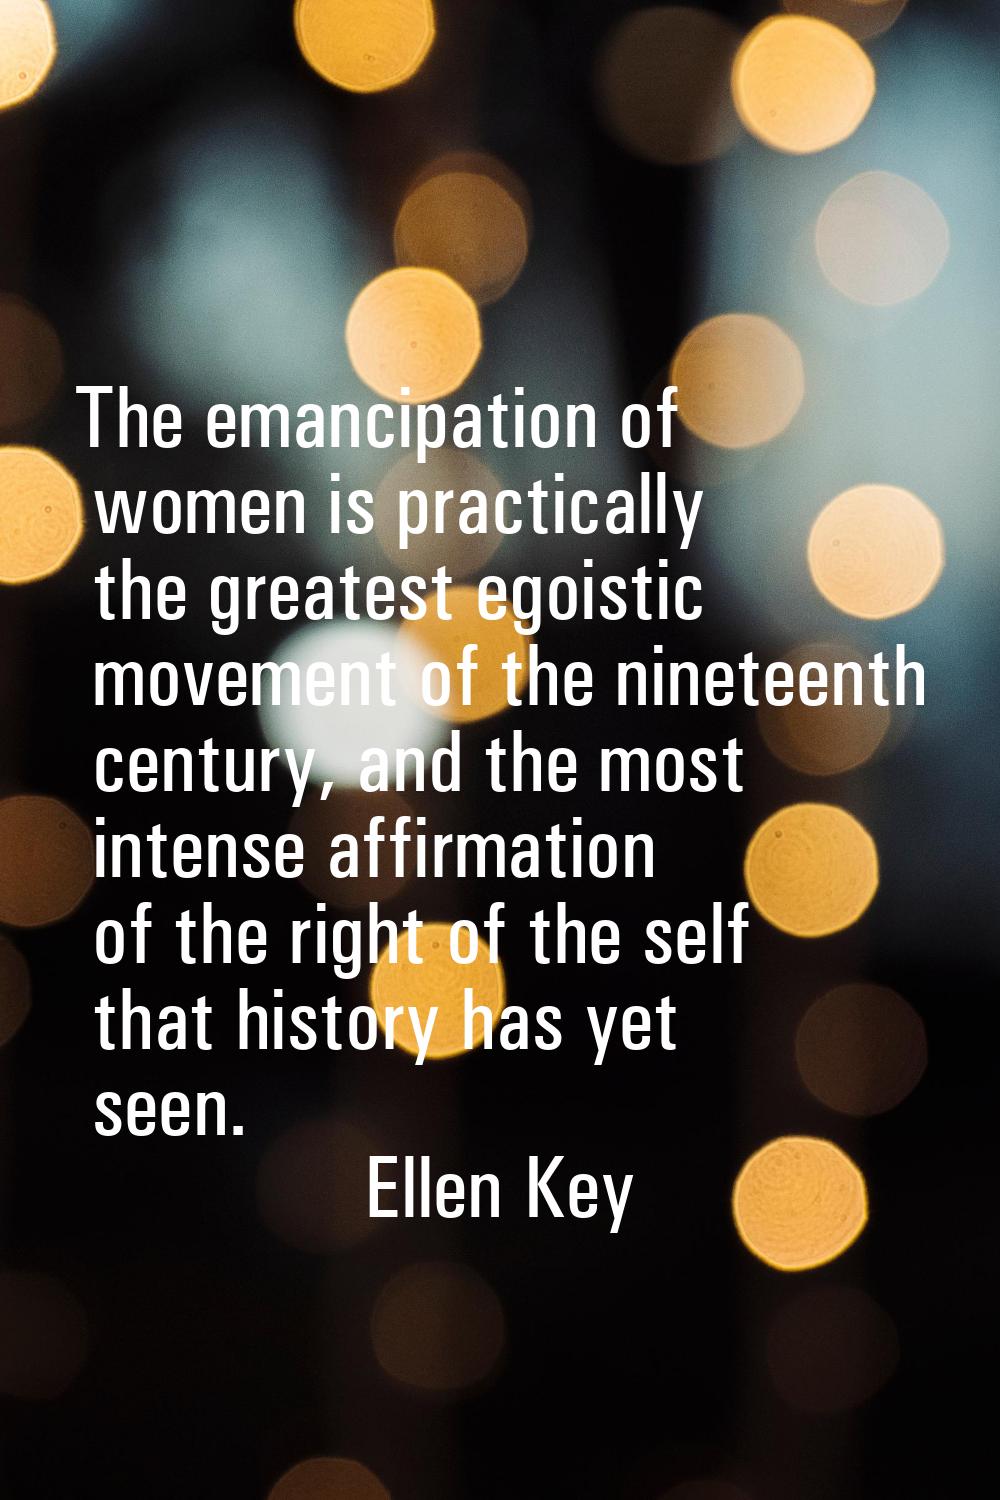 The emancipation of women is practically the greatest egoistic movement of the nineteenth century, 